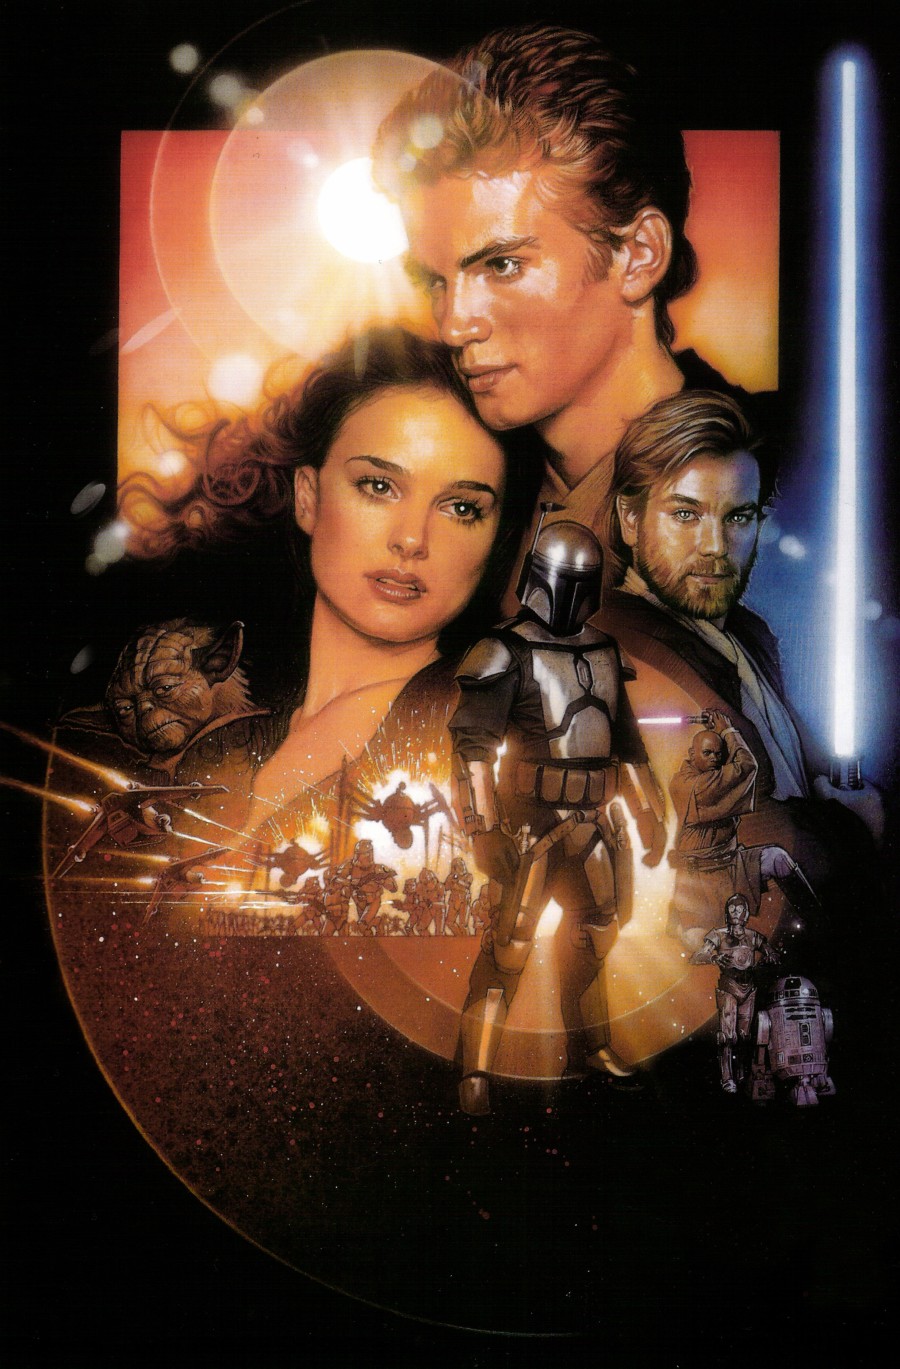 star-wars-episode-ii-attack-of-the-clones-poster-without-word-all-text-removed.jpg